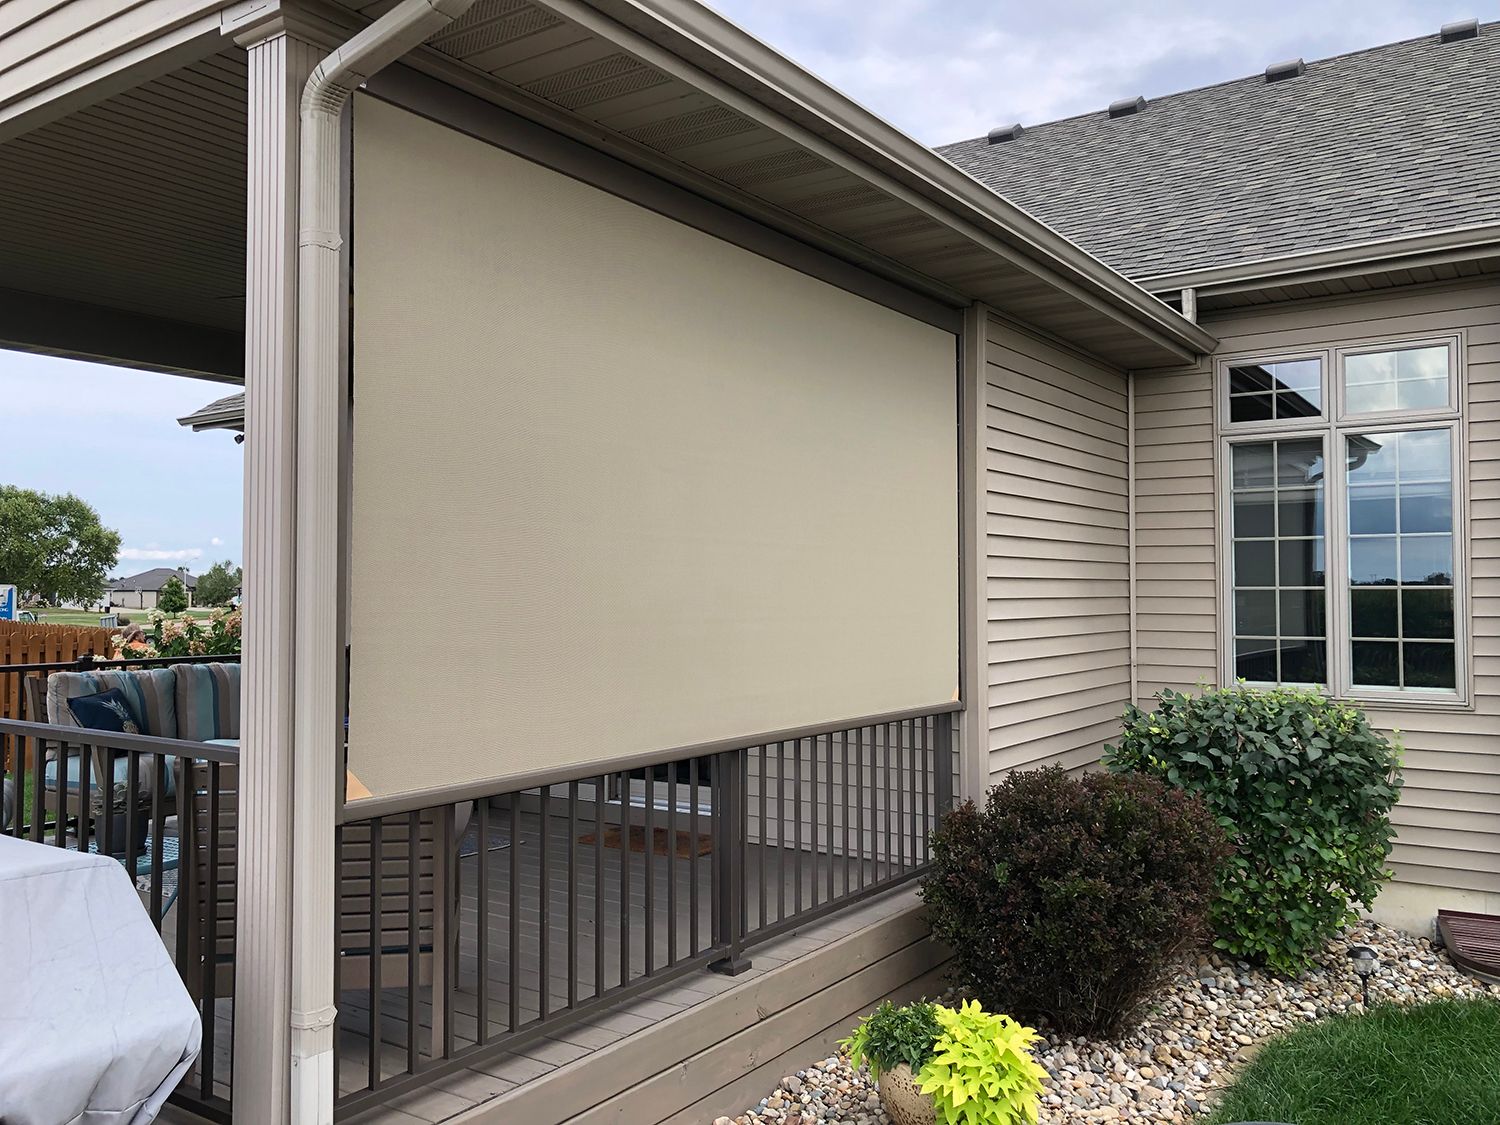 A house with a screen on the side of it